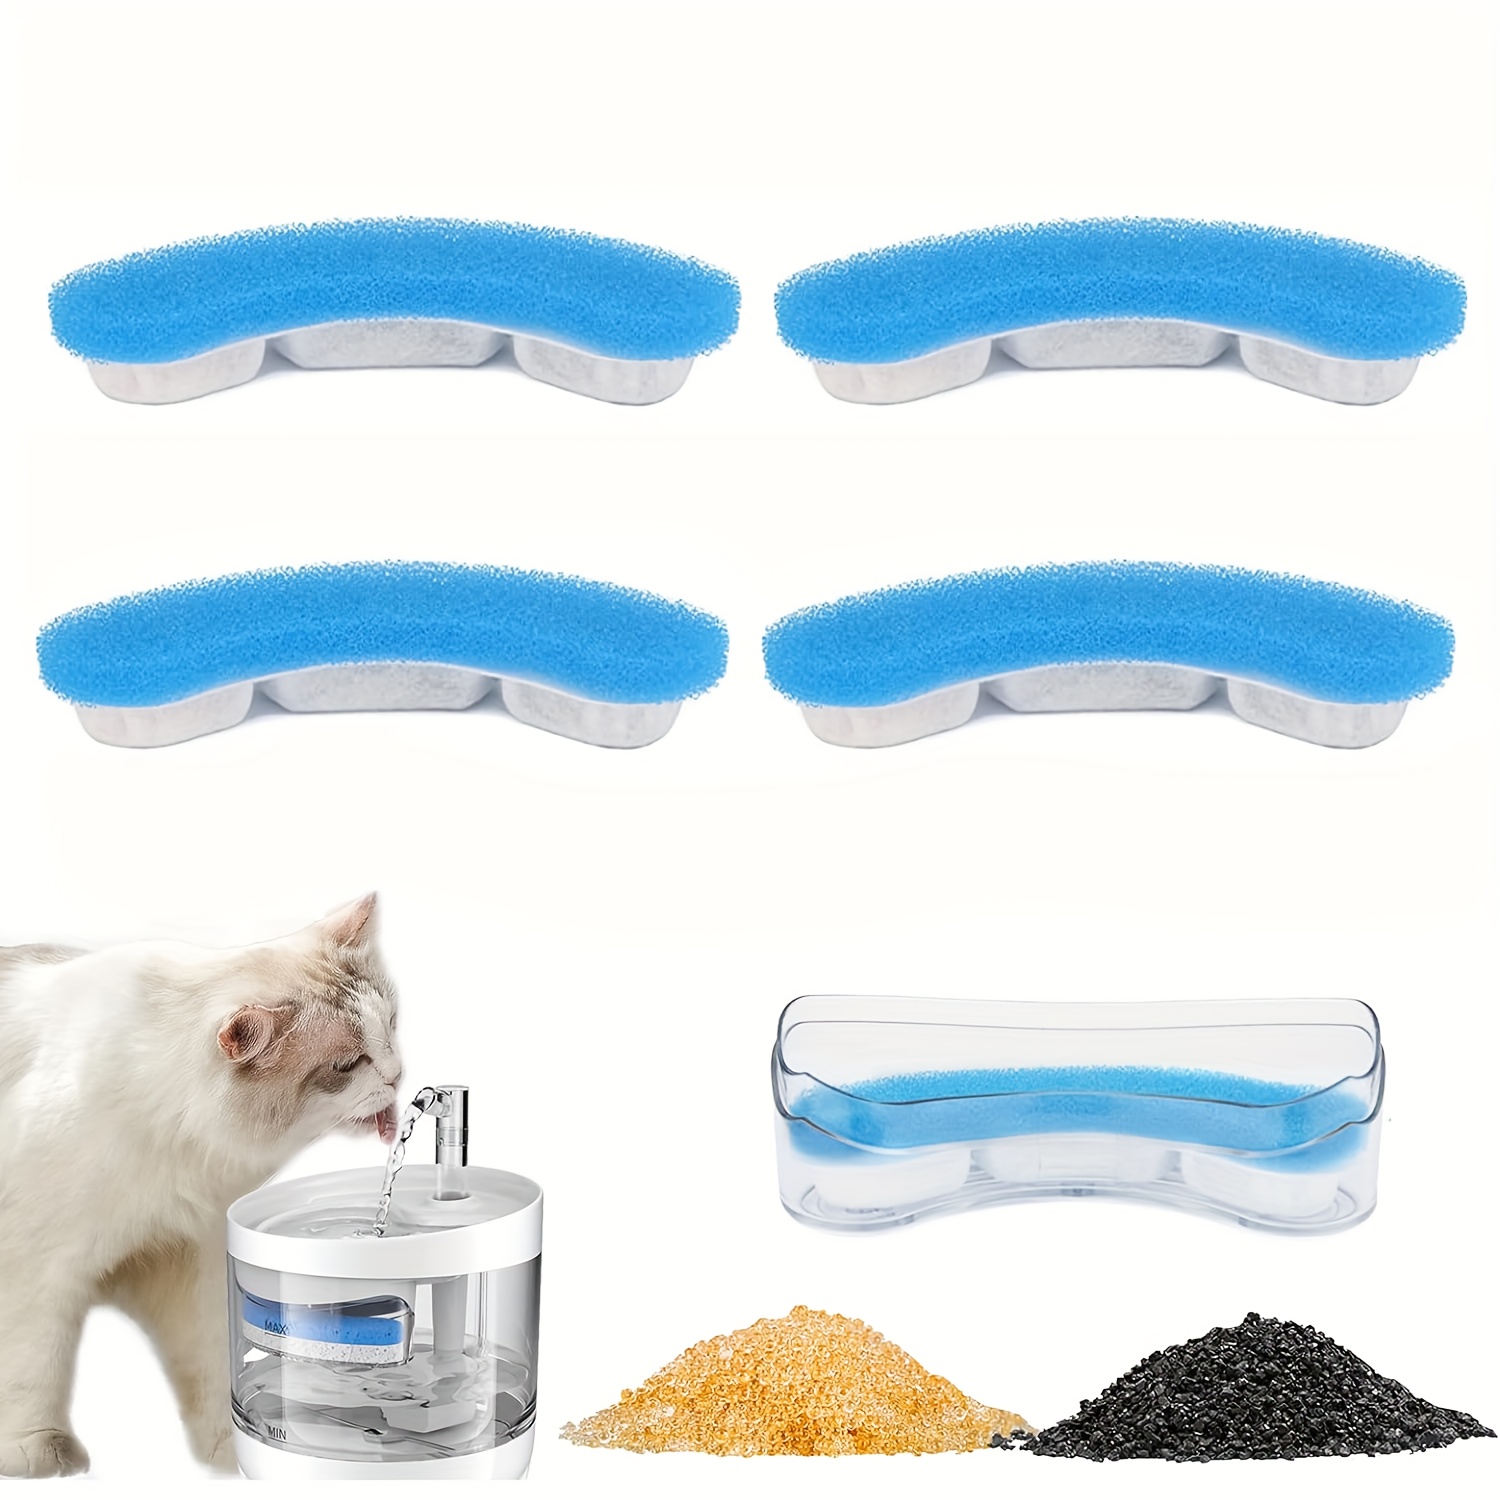 

4pcs Pet Fountain Filter Replacement Cat Water Filter, Suitable For Wf050 & Wf100 Cat Water Drinking Dispenser